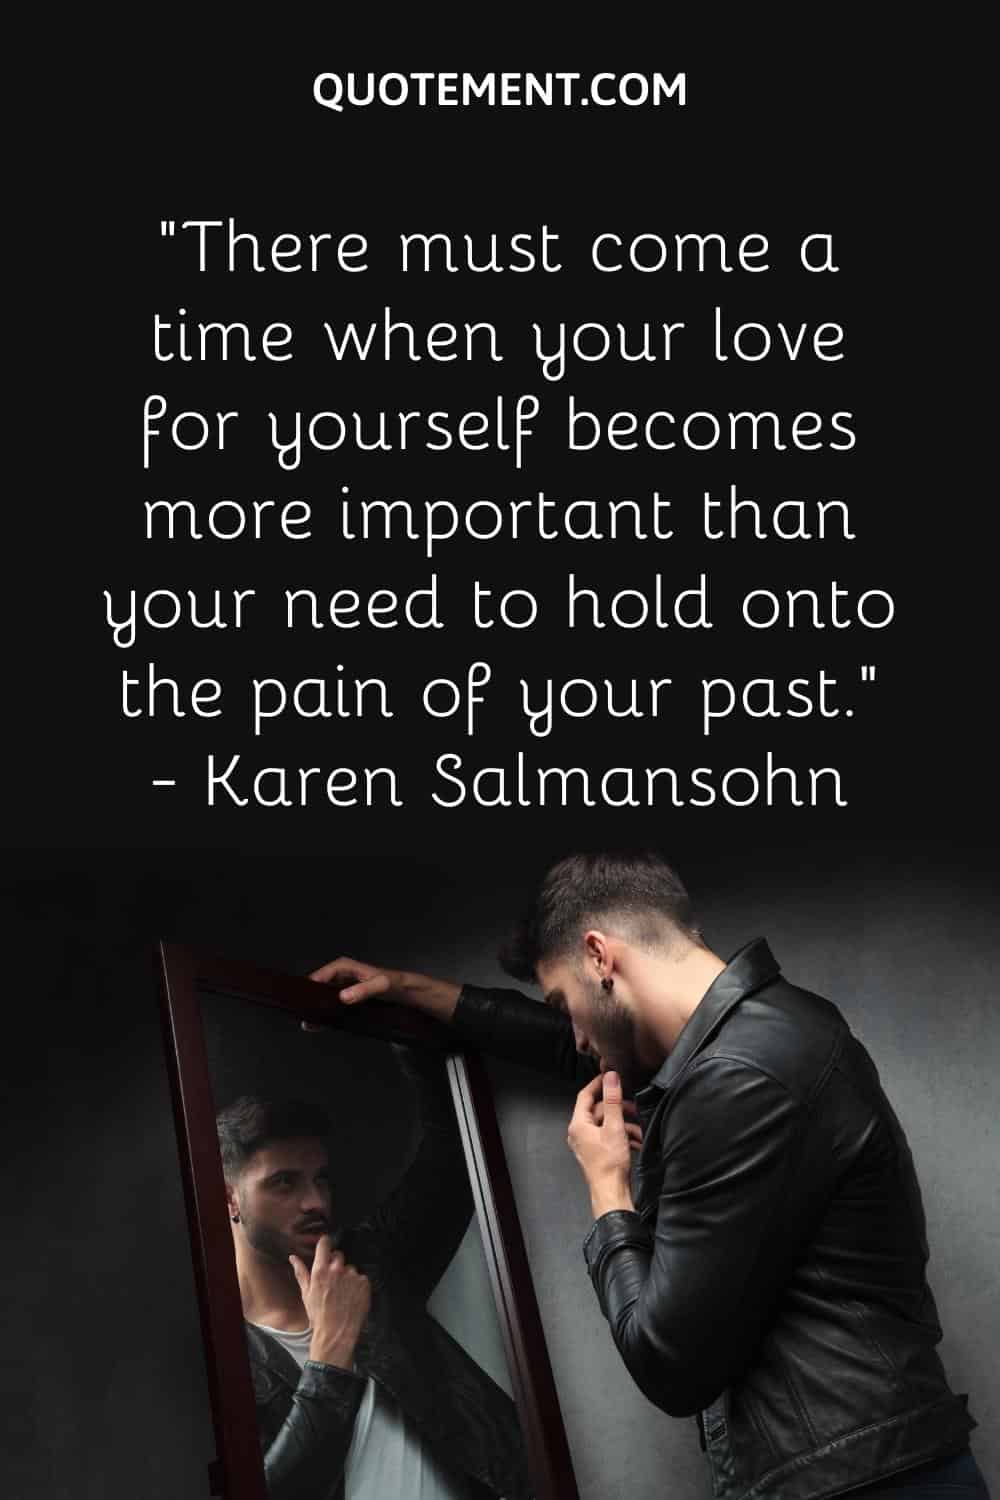 There must come a time when your love for yourself becomes more important than your need to hold onto the pain of your past